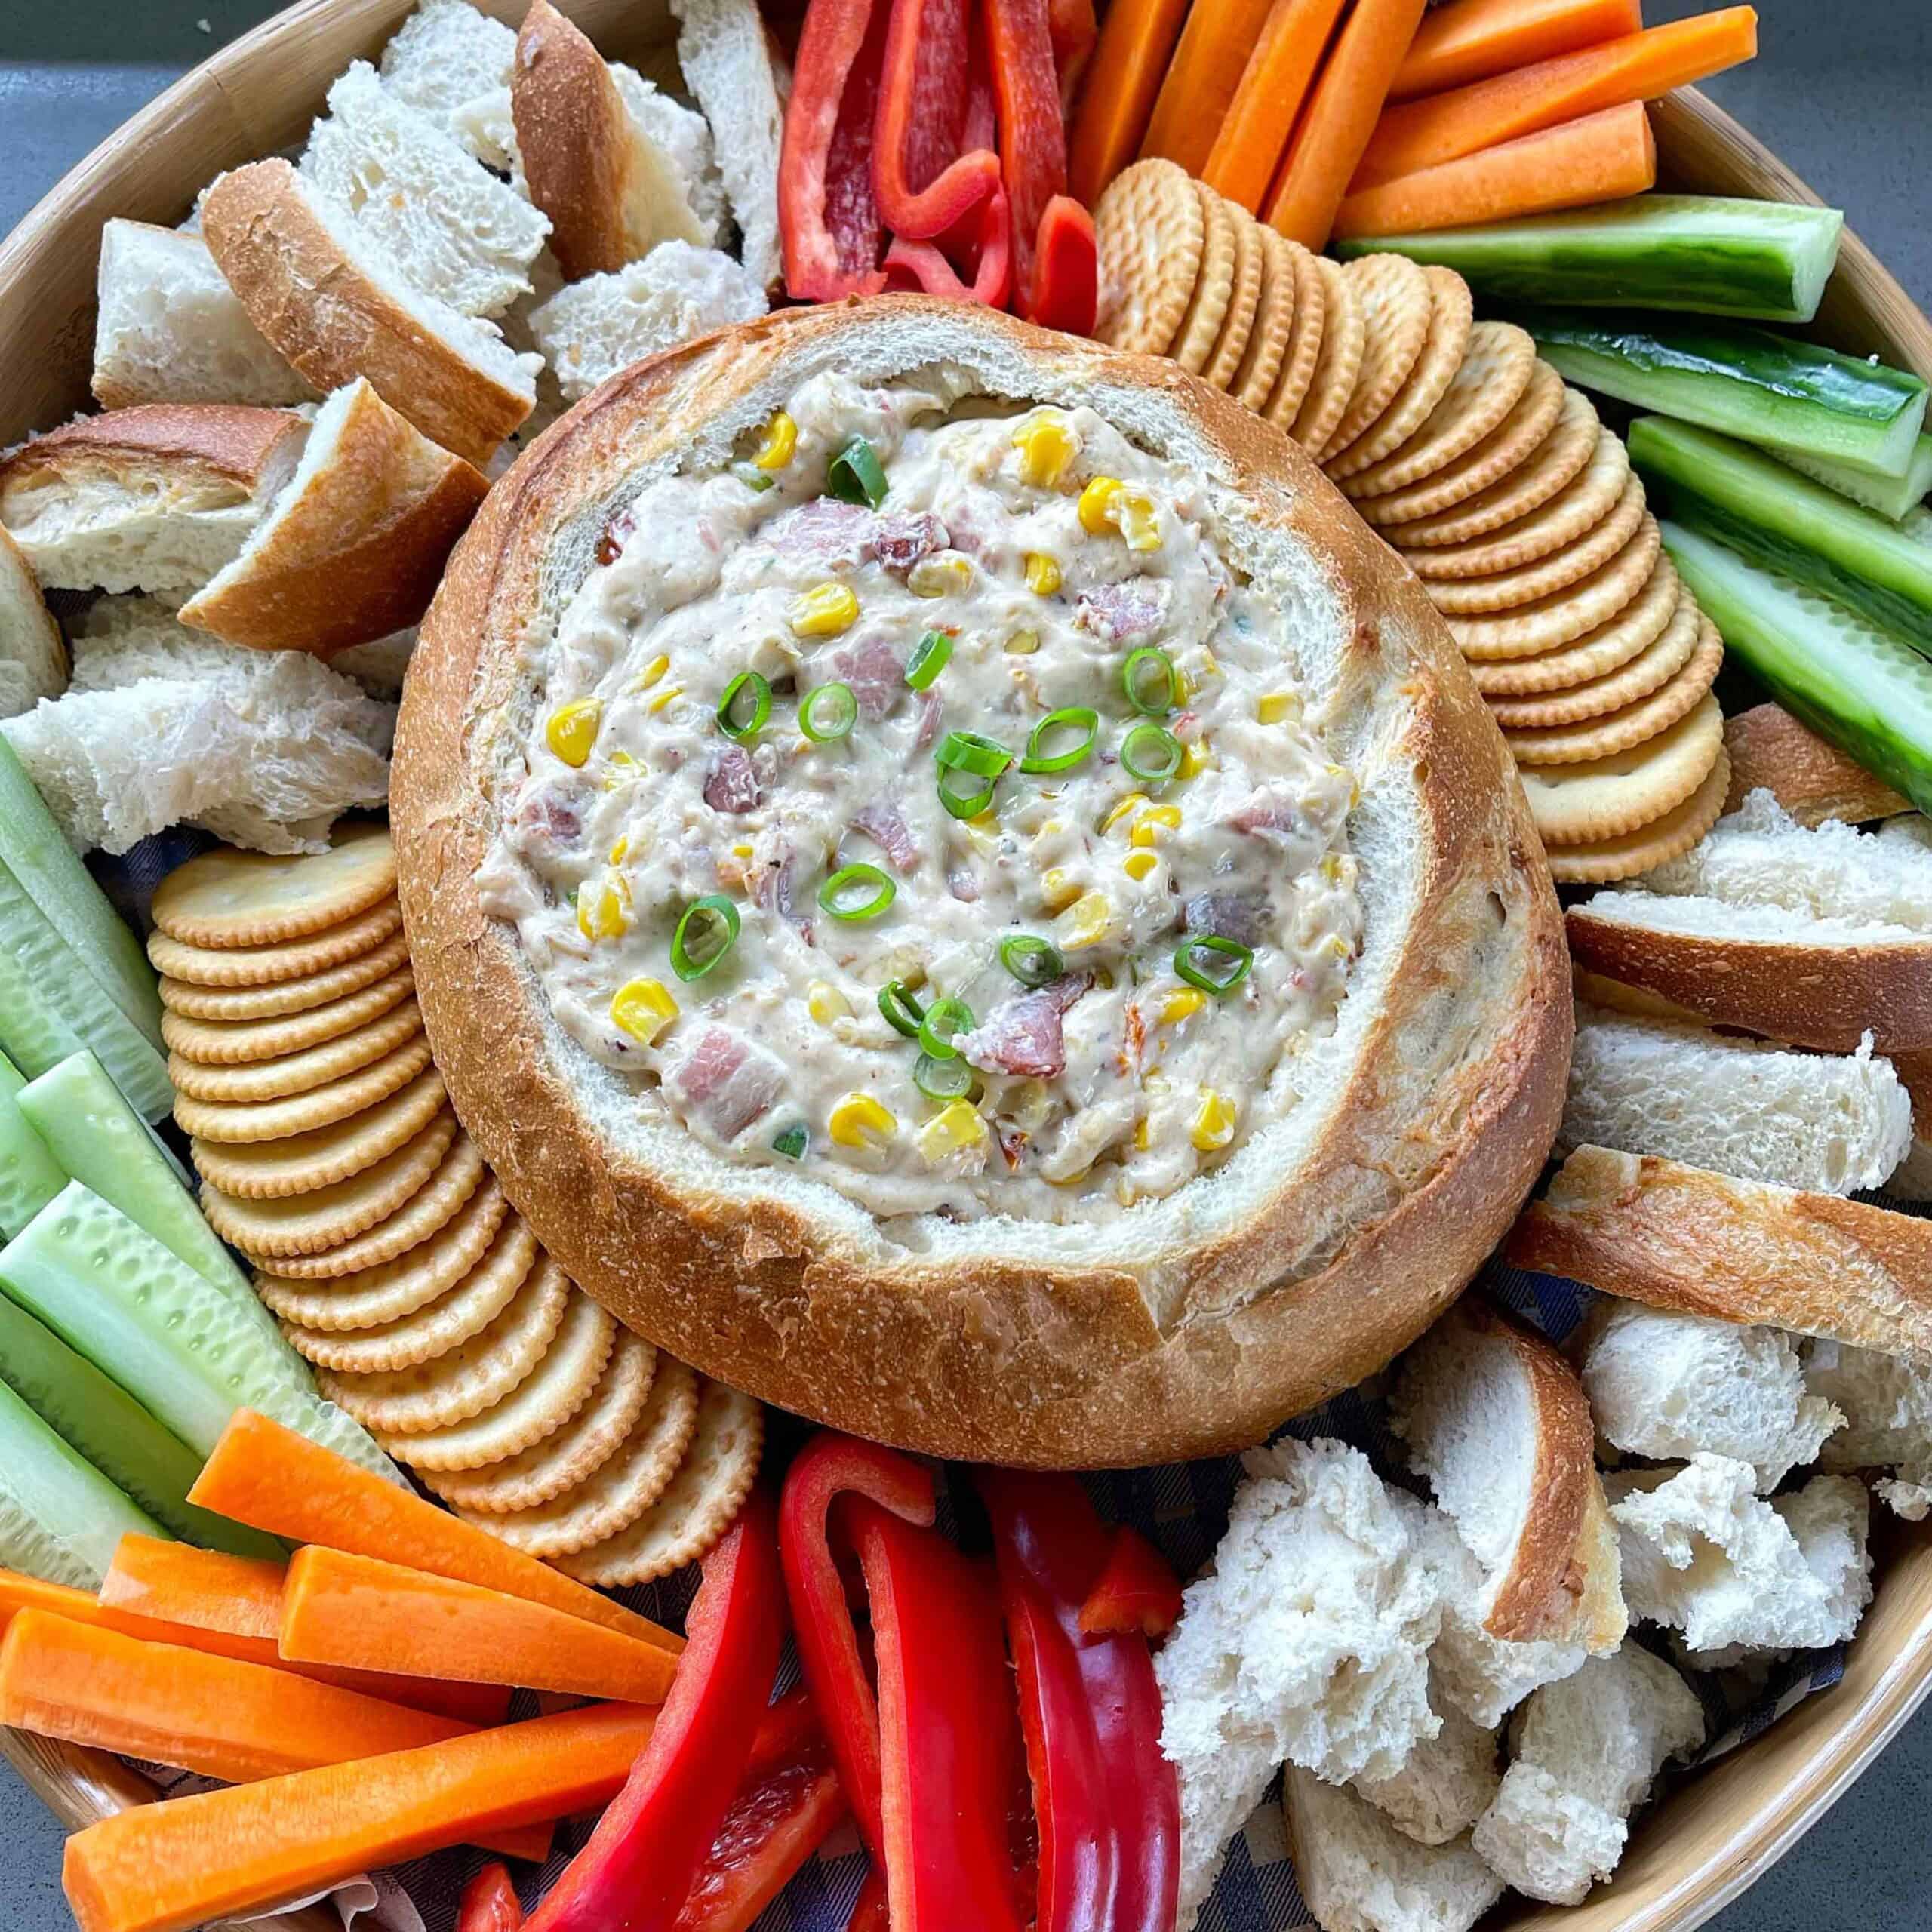 A Cowboy Cob Loaf served on a platter surrounded by vegetables, bread and crackers.